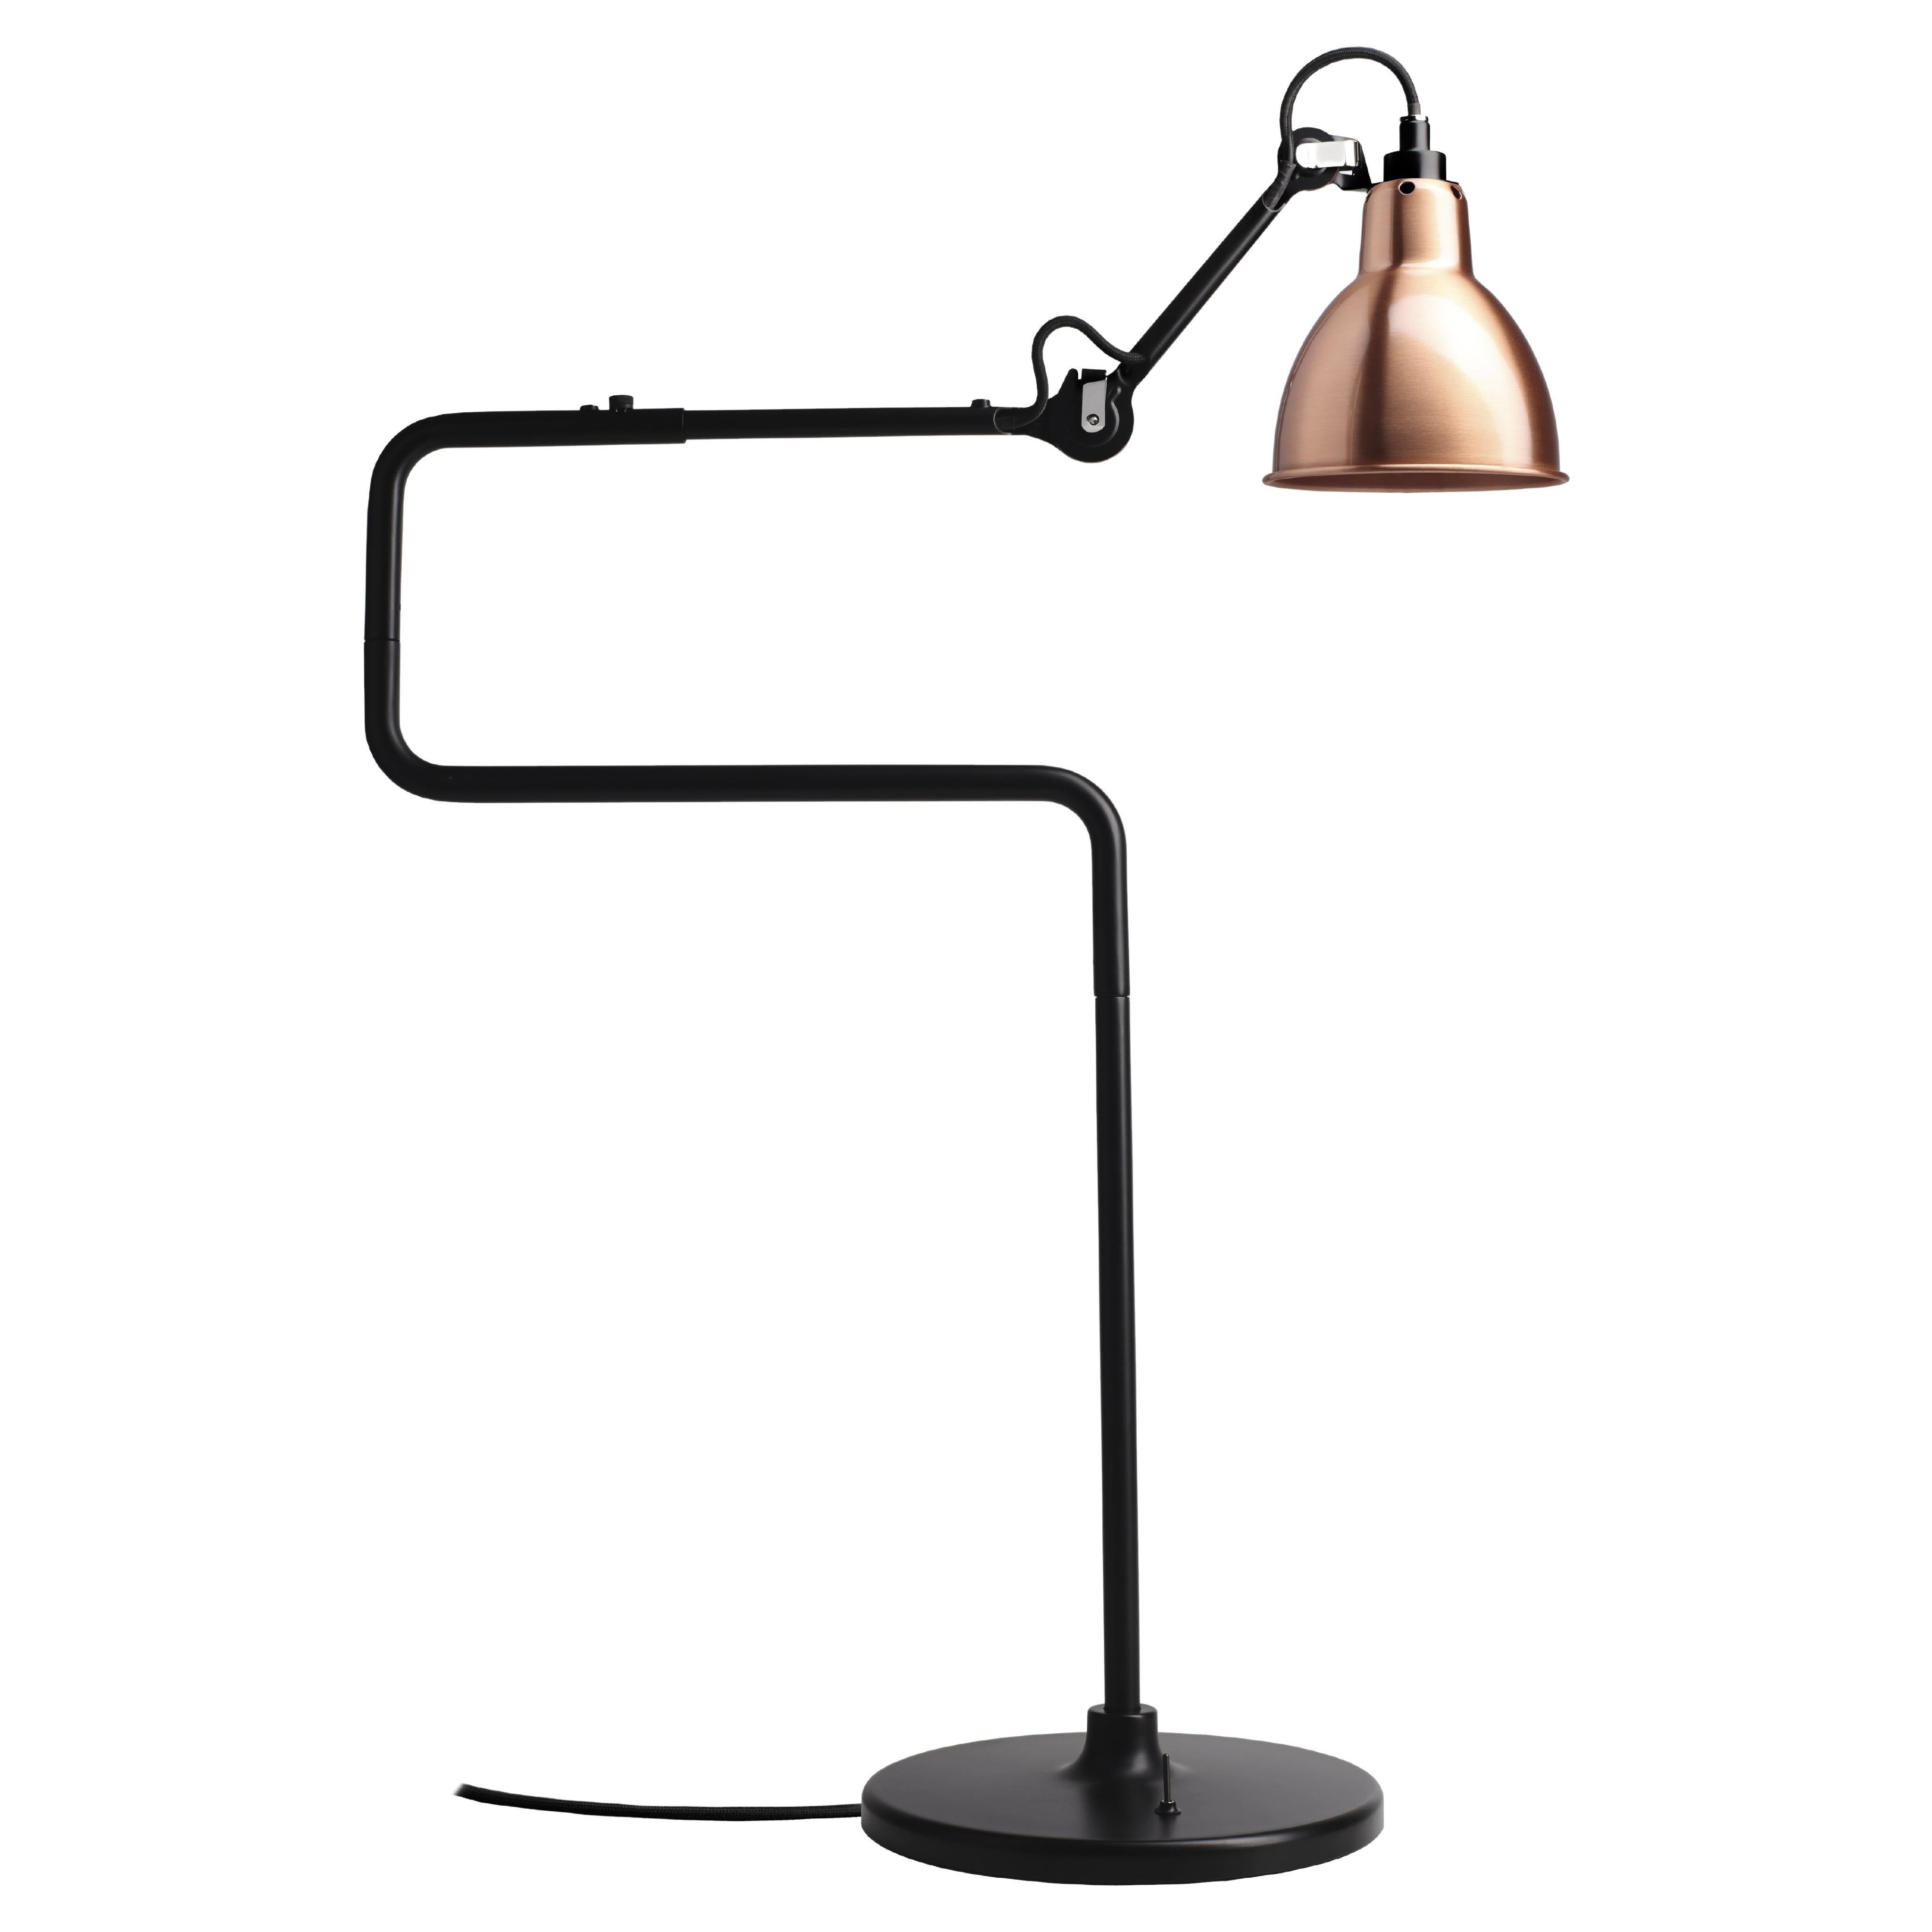 DCW Editions La Lampe Gras N°317 Table Lamp in Black Arm with Copper Shade For Sale